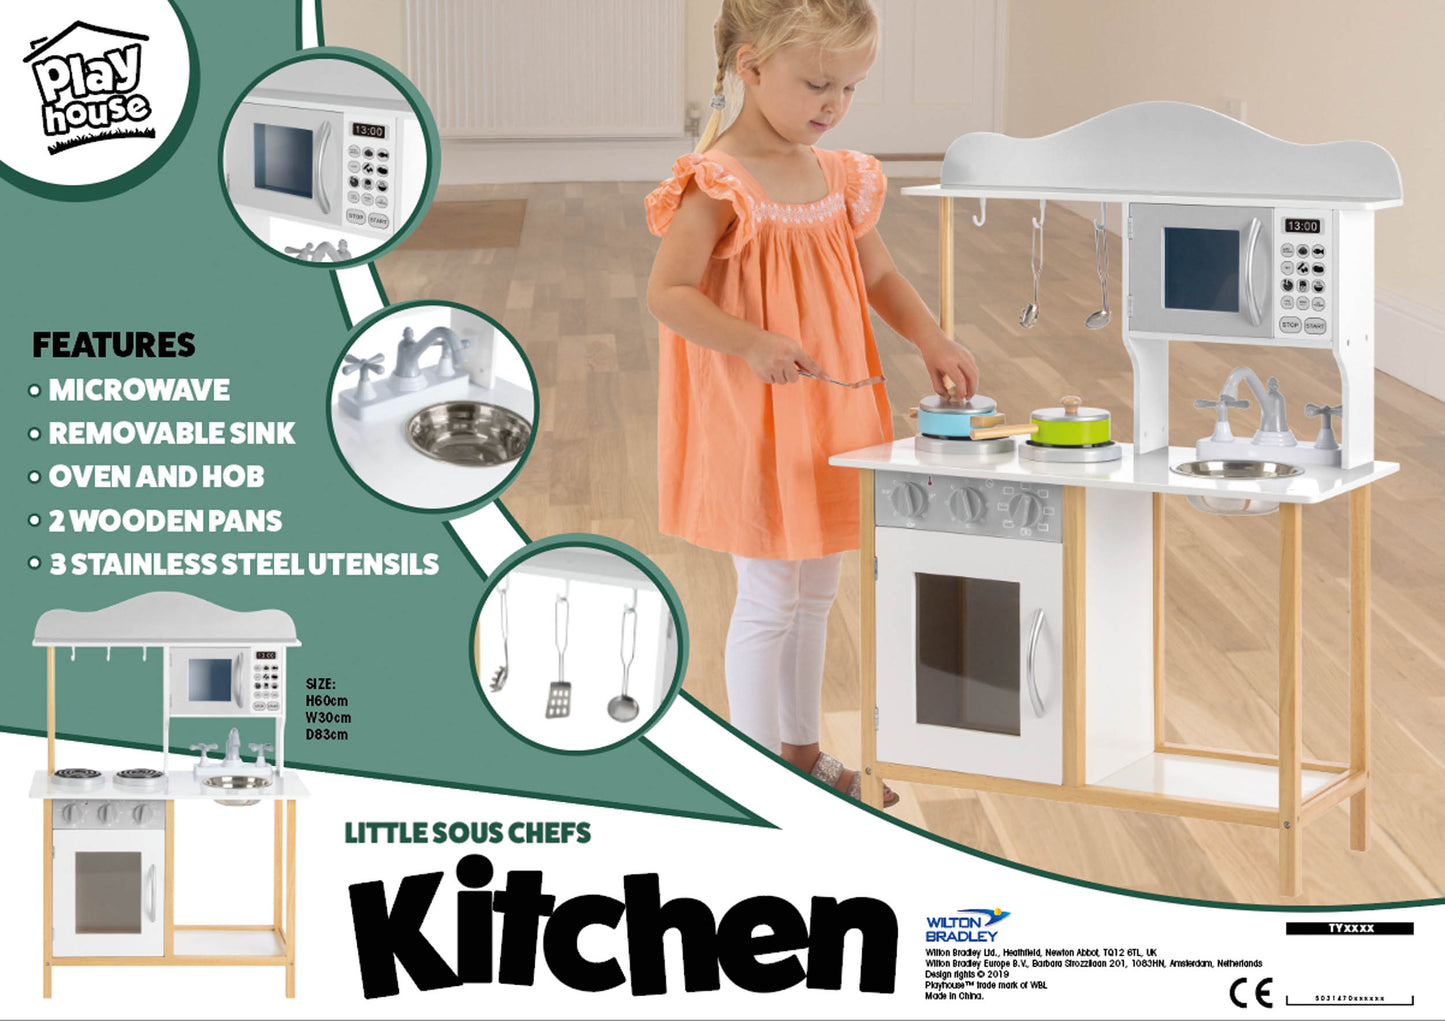 PLAYHOUSE- TY6133 - PLAYHOUSE LITTLE SOUS CHEFS KITCHEN - Rich Kids Playground